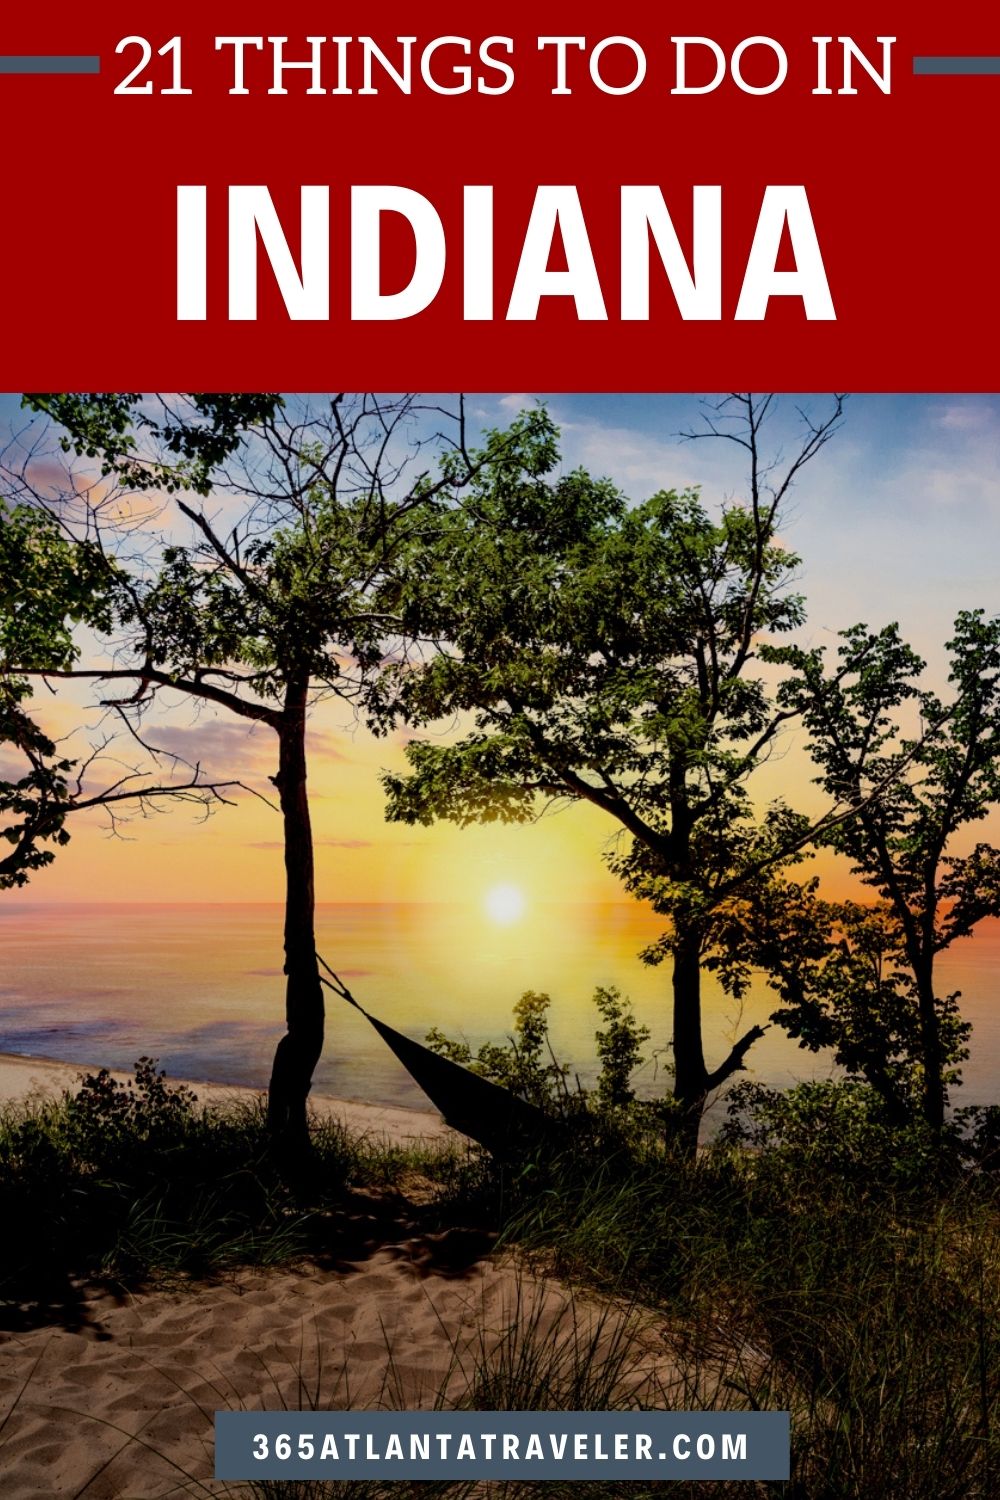 21 AMAZING THINGS TO DO IN INDIANA YOU CAN'T MISS